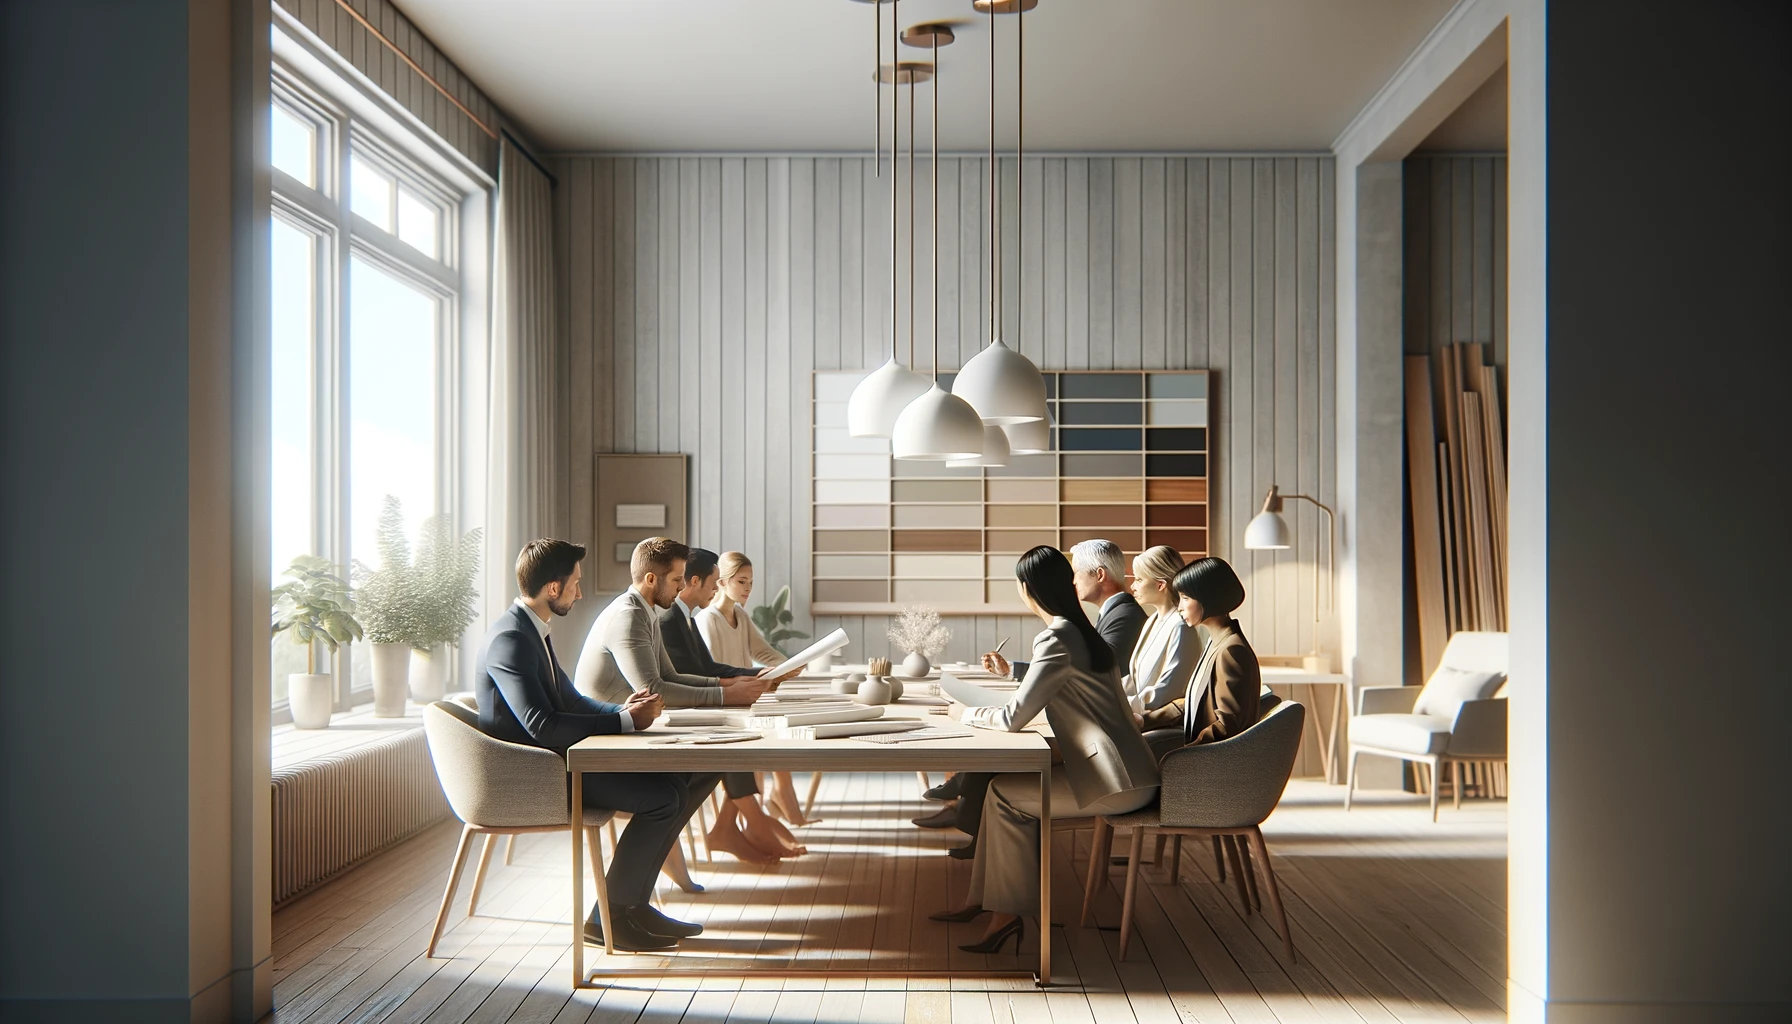 A clean, photographic scene of a small, diverse group of people gathered around a spacious, uncluttered table, deeply focused on discussing home remodeling project